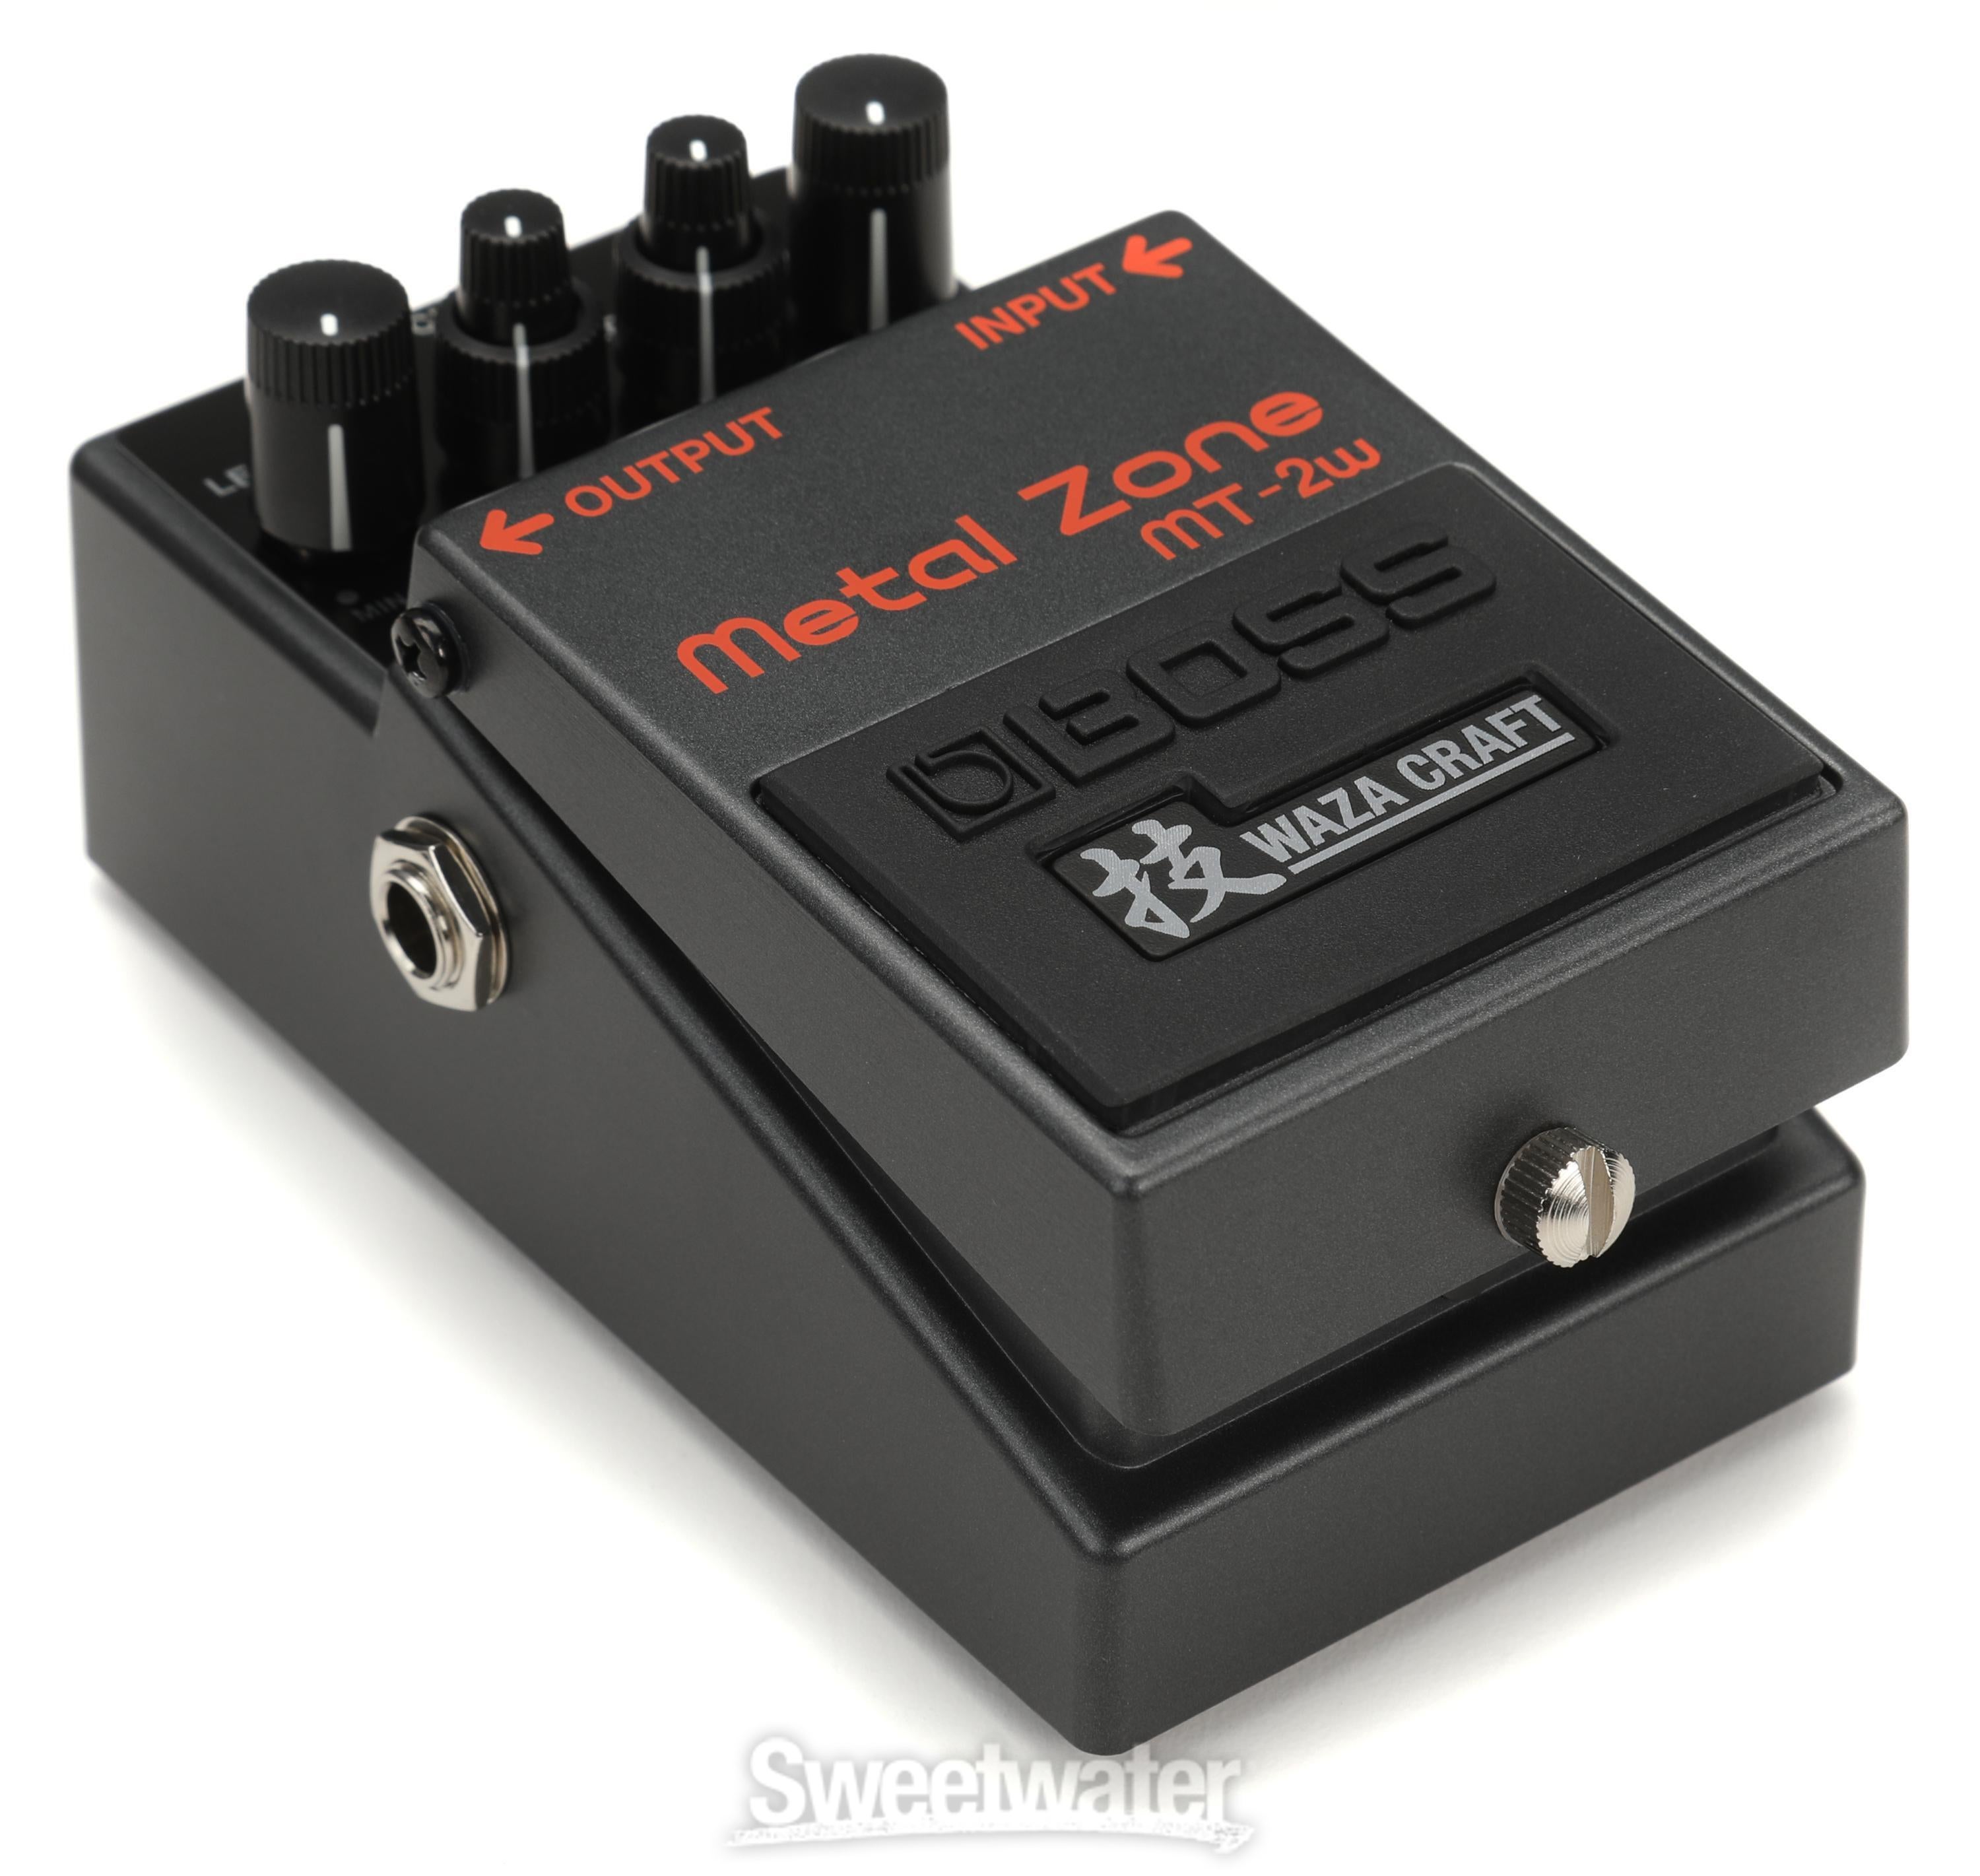 Boss MTW Waza Craft Metal Zone Distortion Pedal   Sweetwater